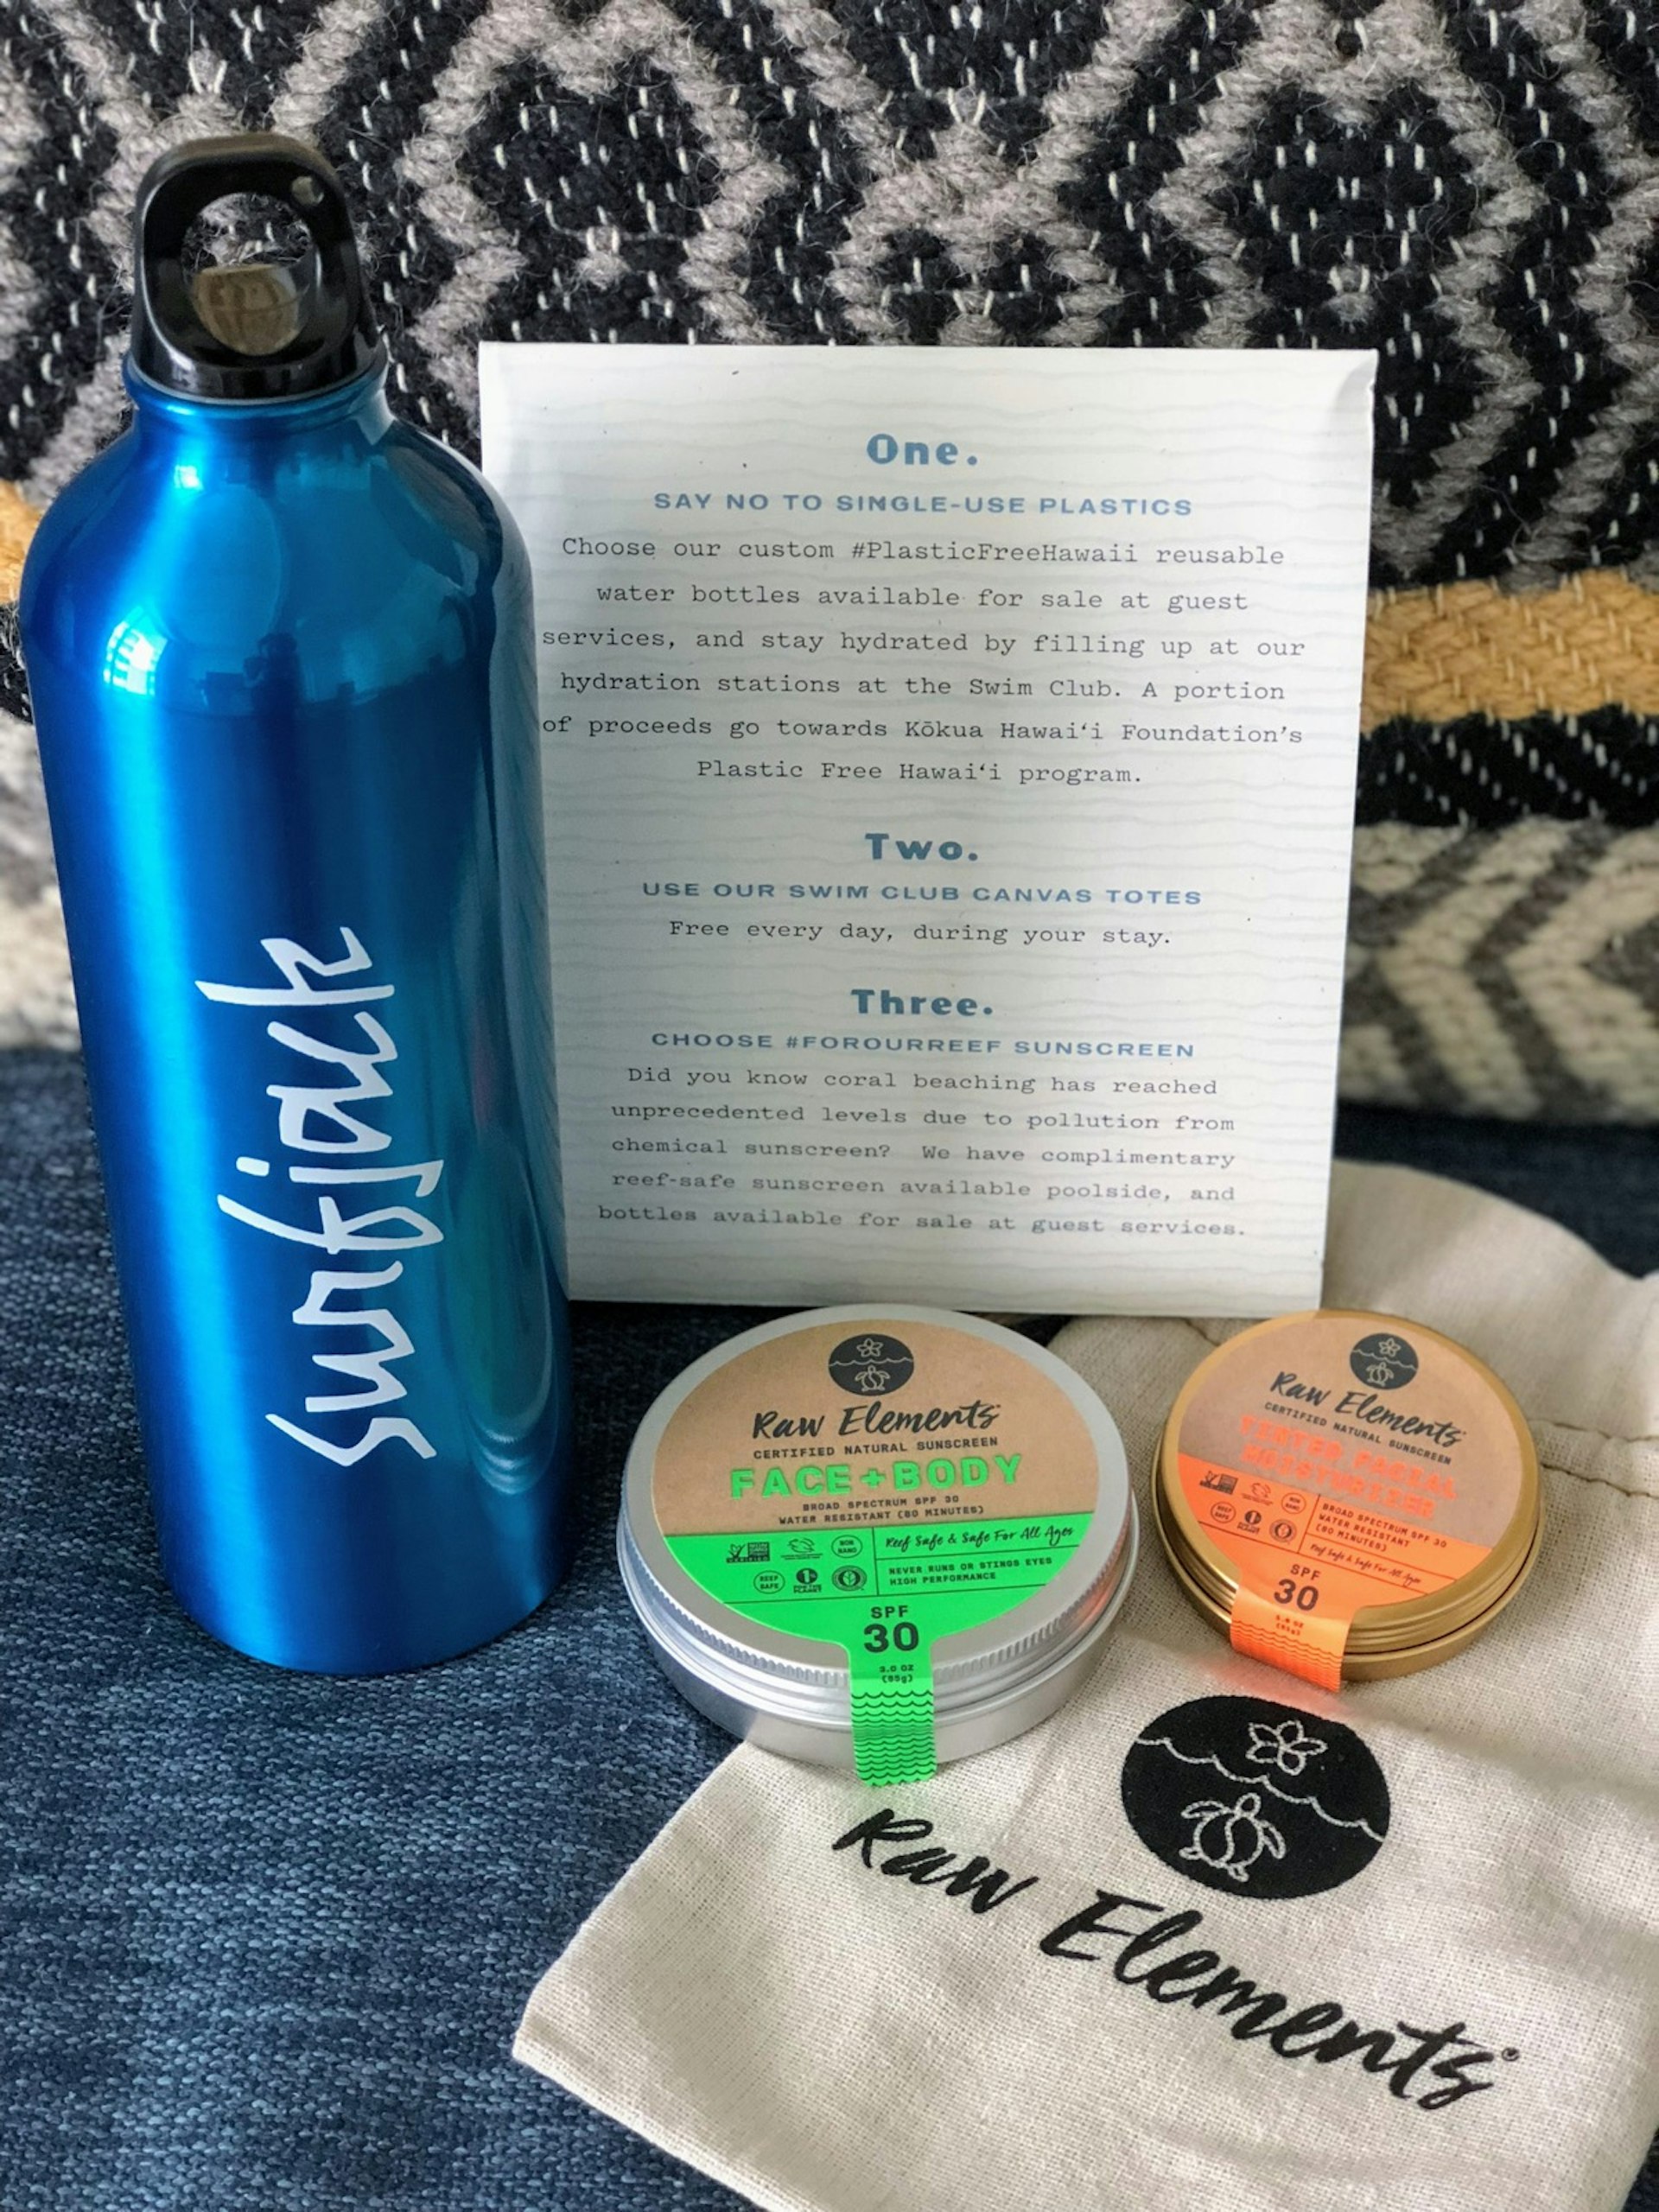 Gear including a reusable water bottle, reef safe sun products and a reusable canvas bag are shown with a letter offering ideas for sustainable travel